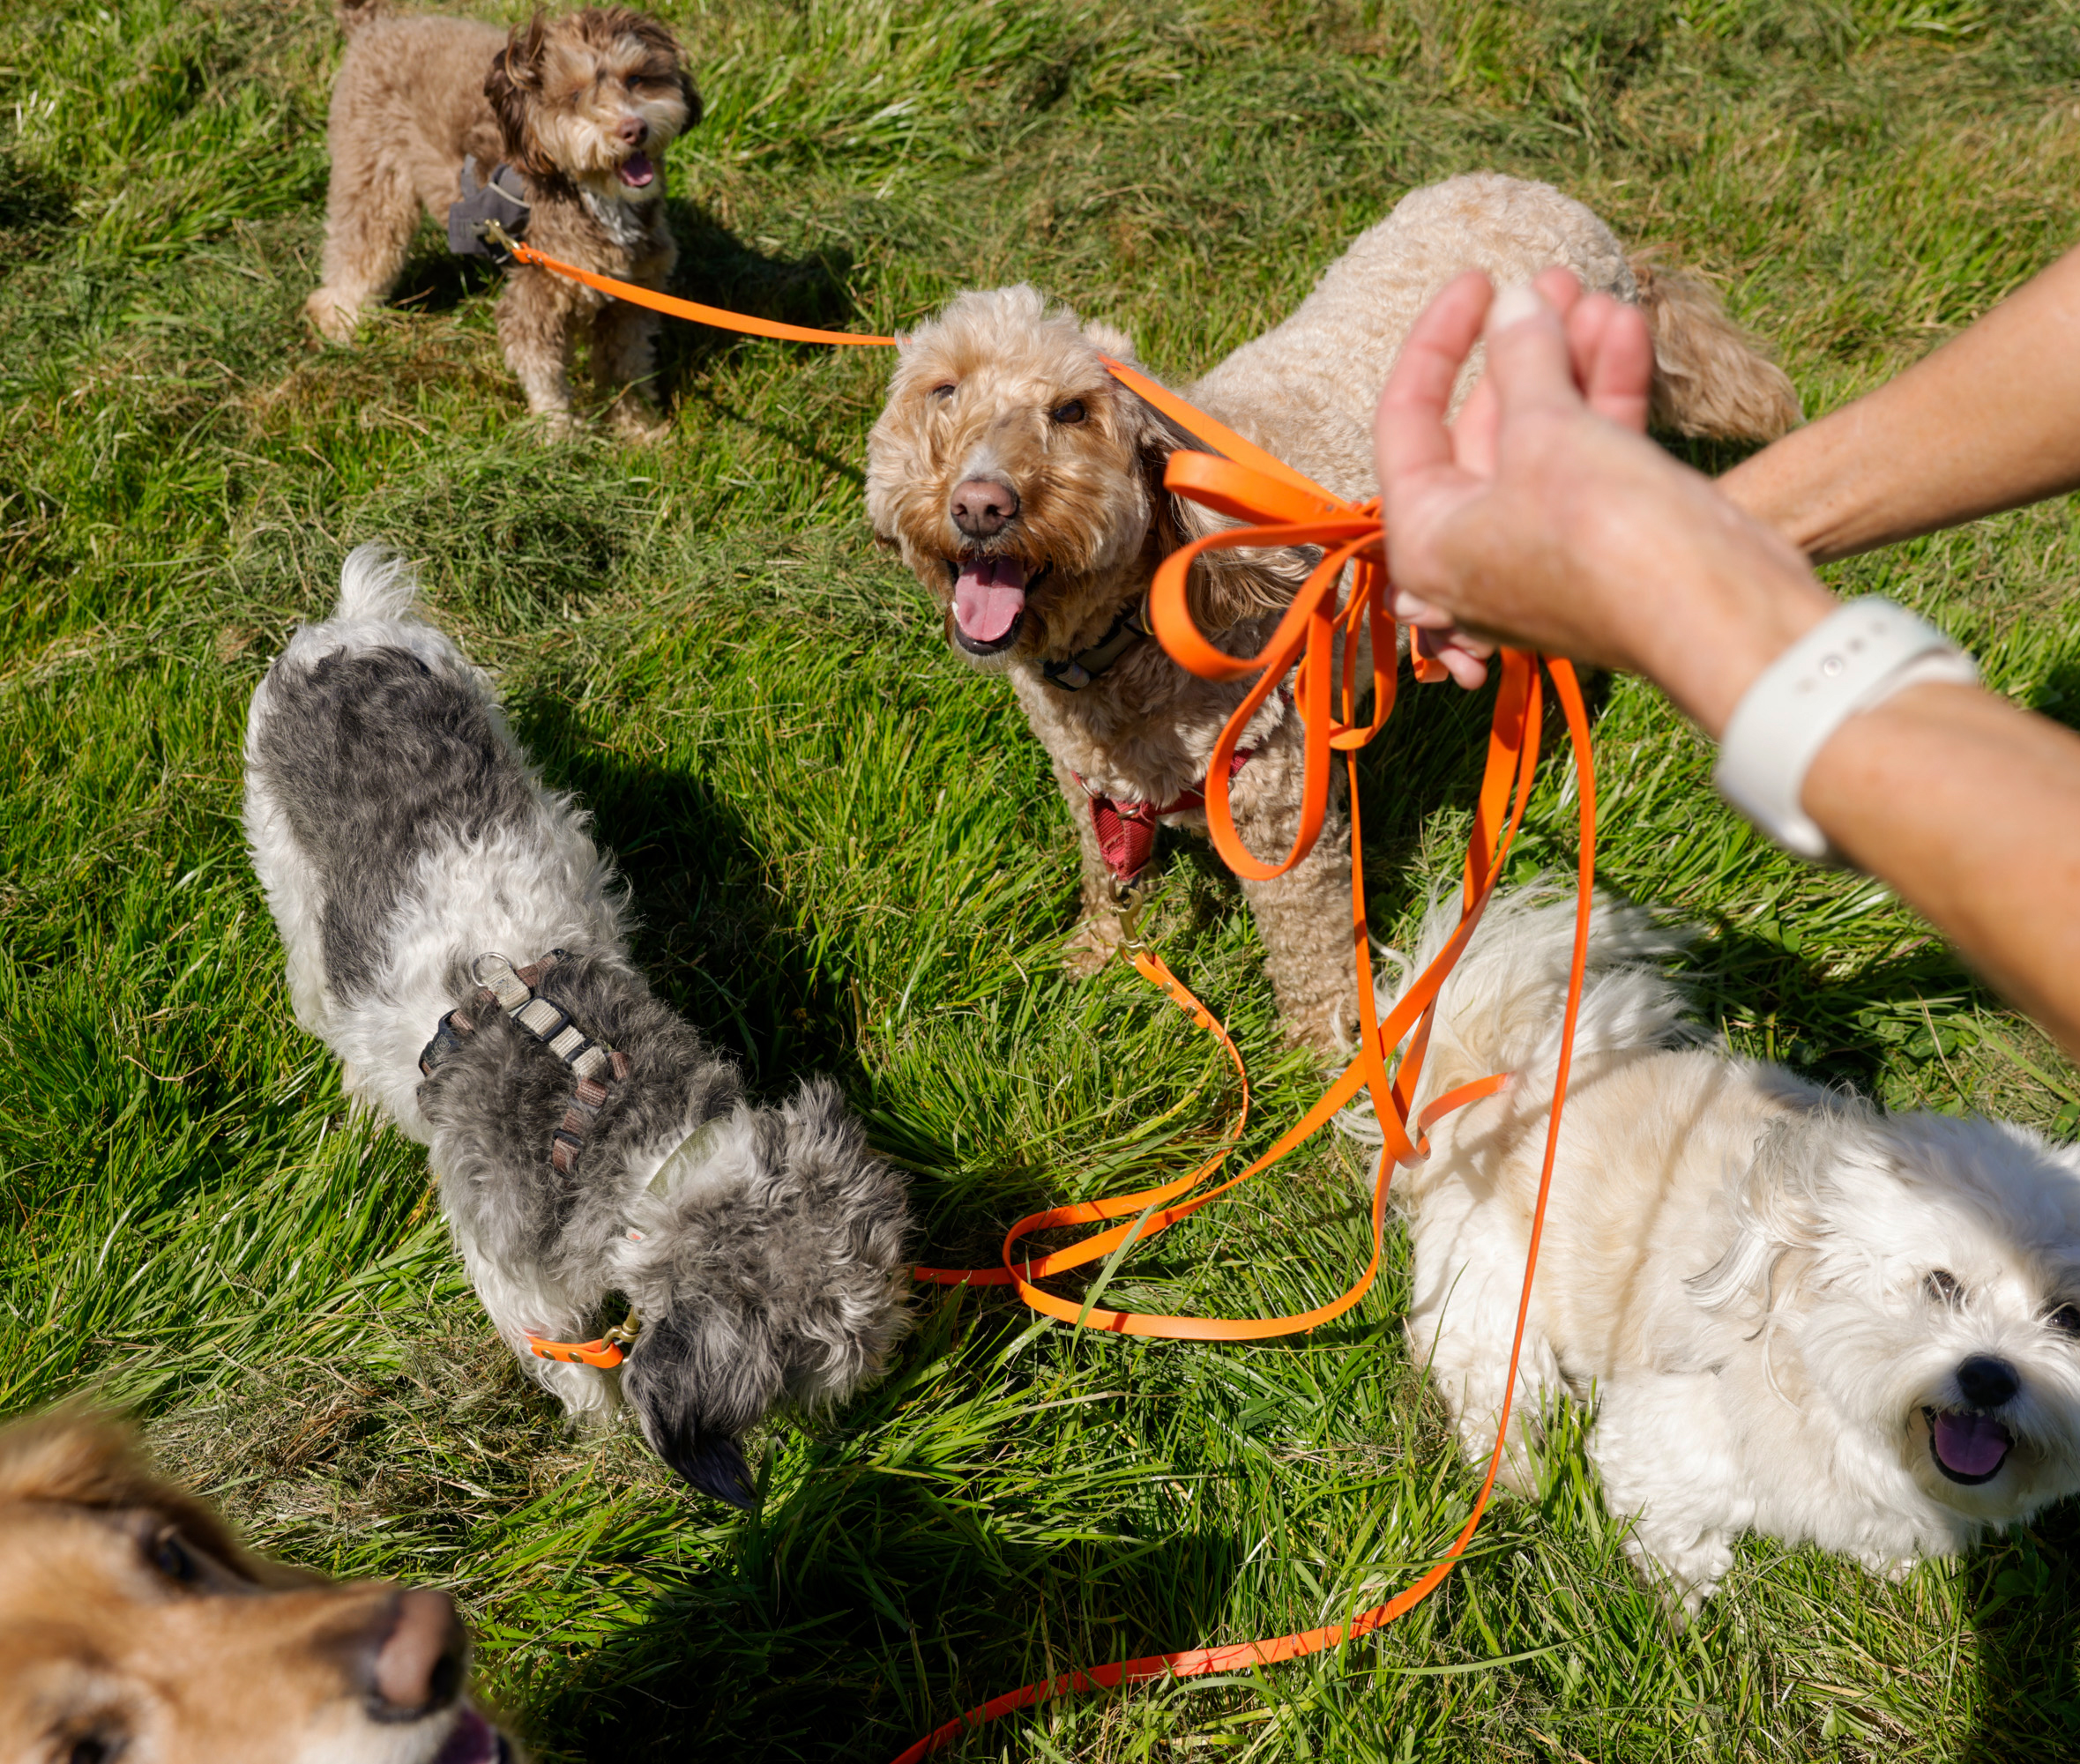 Four playful dogs on grass entangled in orange leashes held by a person.